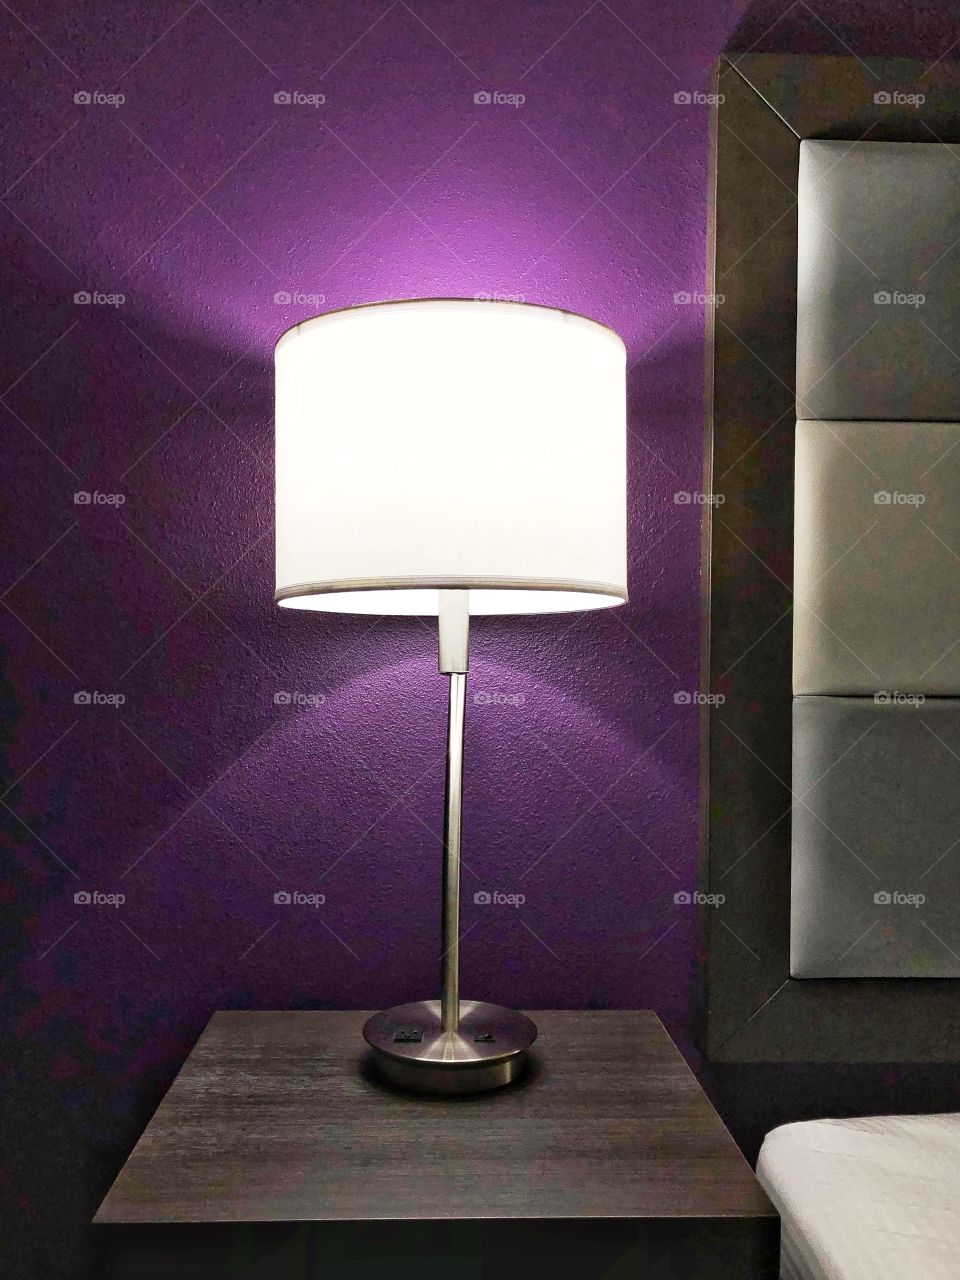 Bright lamp at room with purple walls